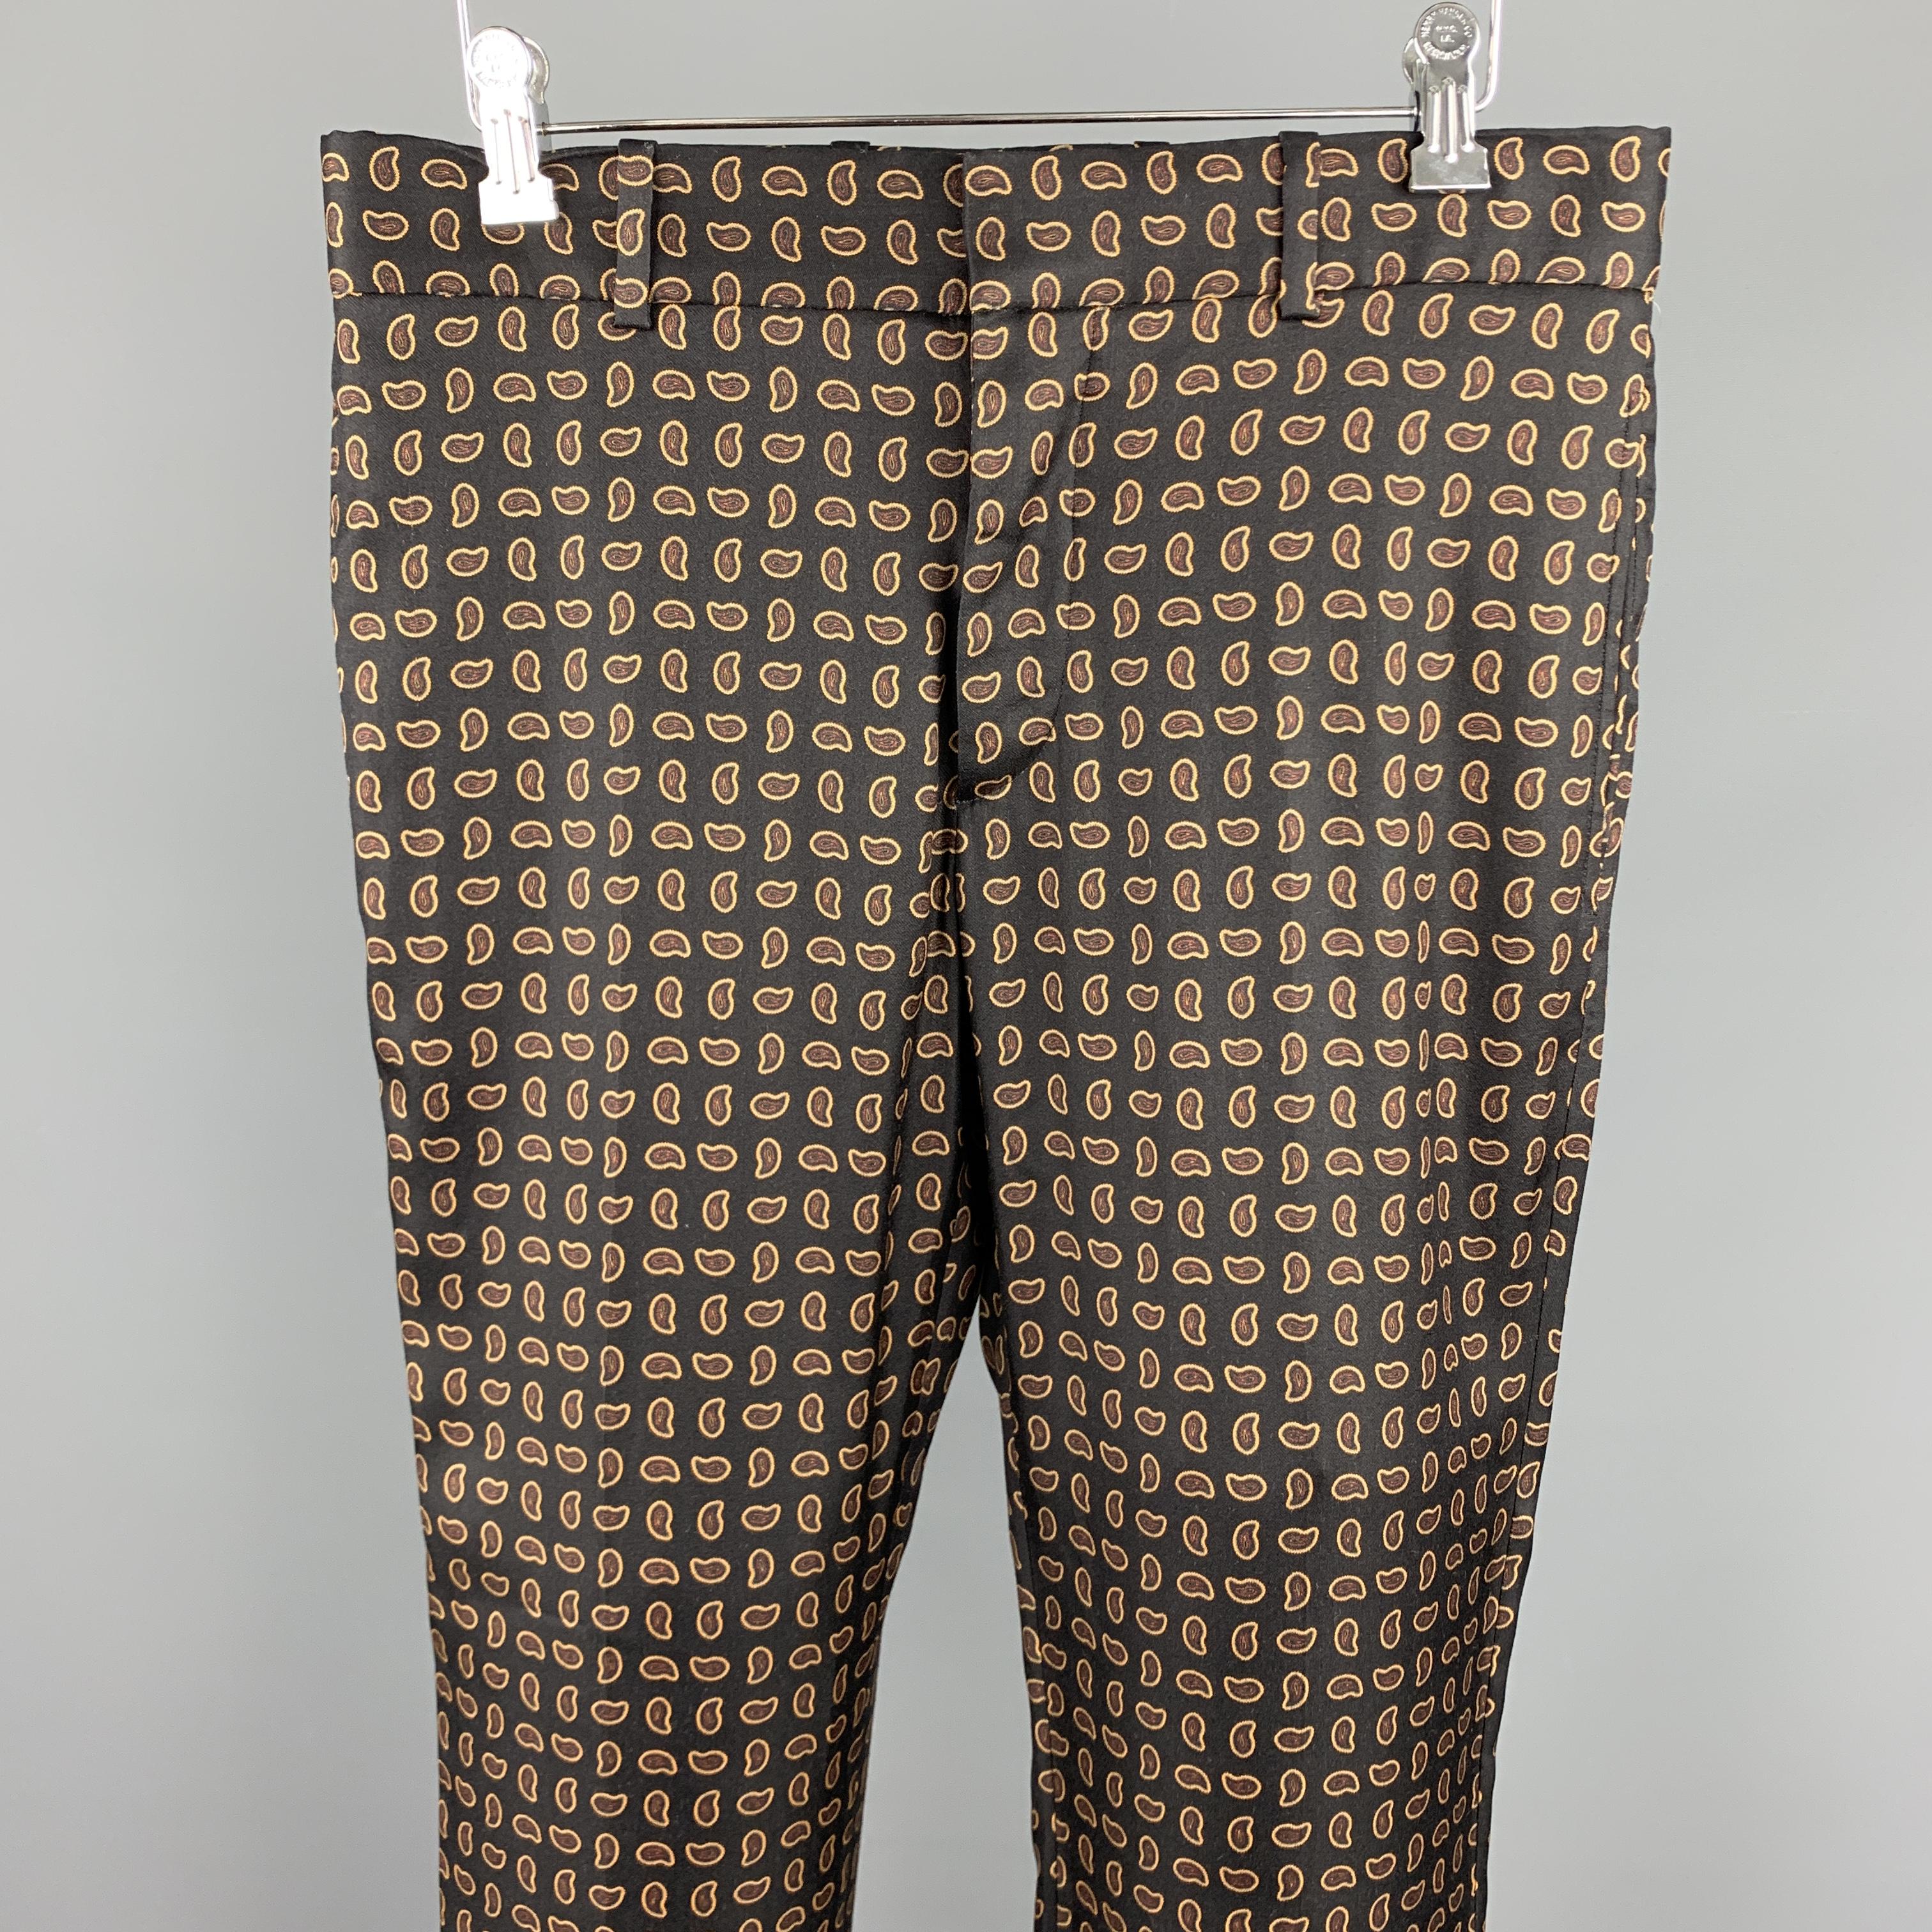 ALEXANDER MCQUEEN casual pants comes in a black wool with a all over paisley print featuring a flat front and a zip fly closure. Made in Romania.

Excellent Pre-Owned Condition.
Marked: 46

Measurements:

Waist: 32 in. 
Rise: 9 in. 
Inseam: 28 in. 